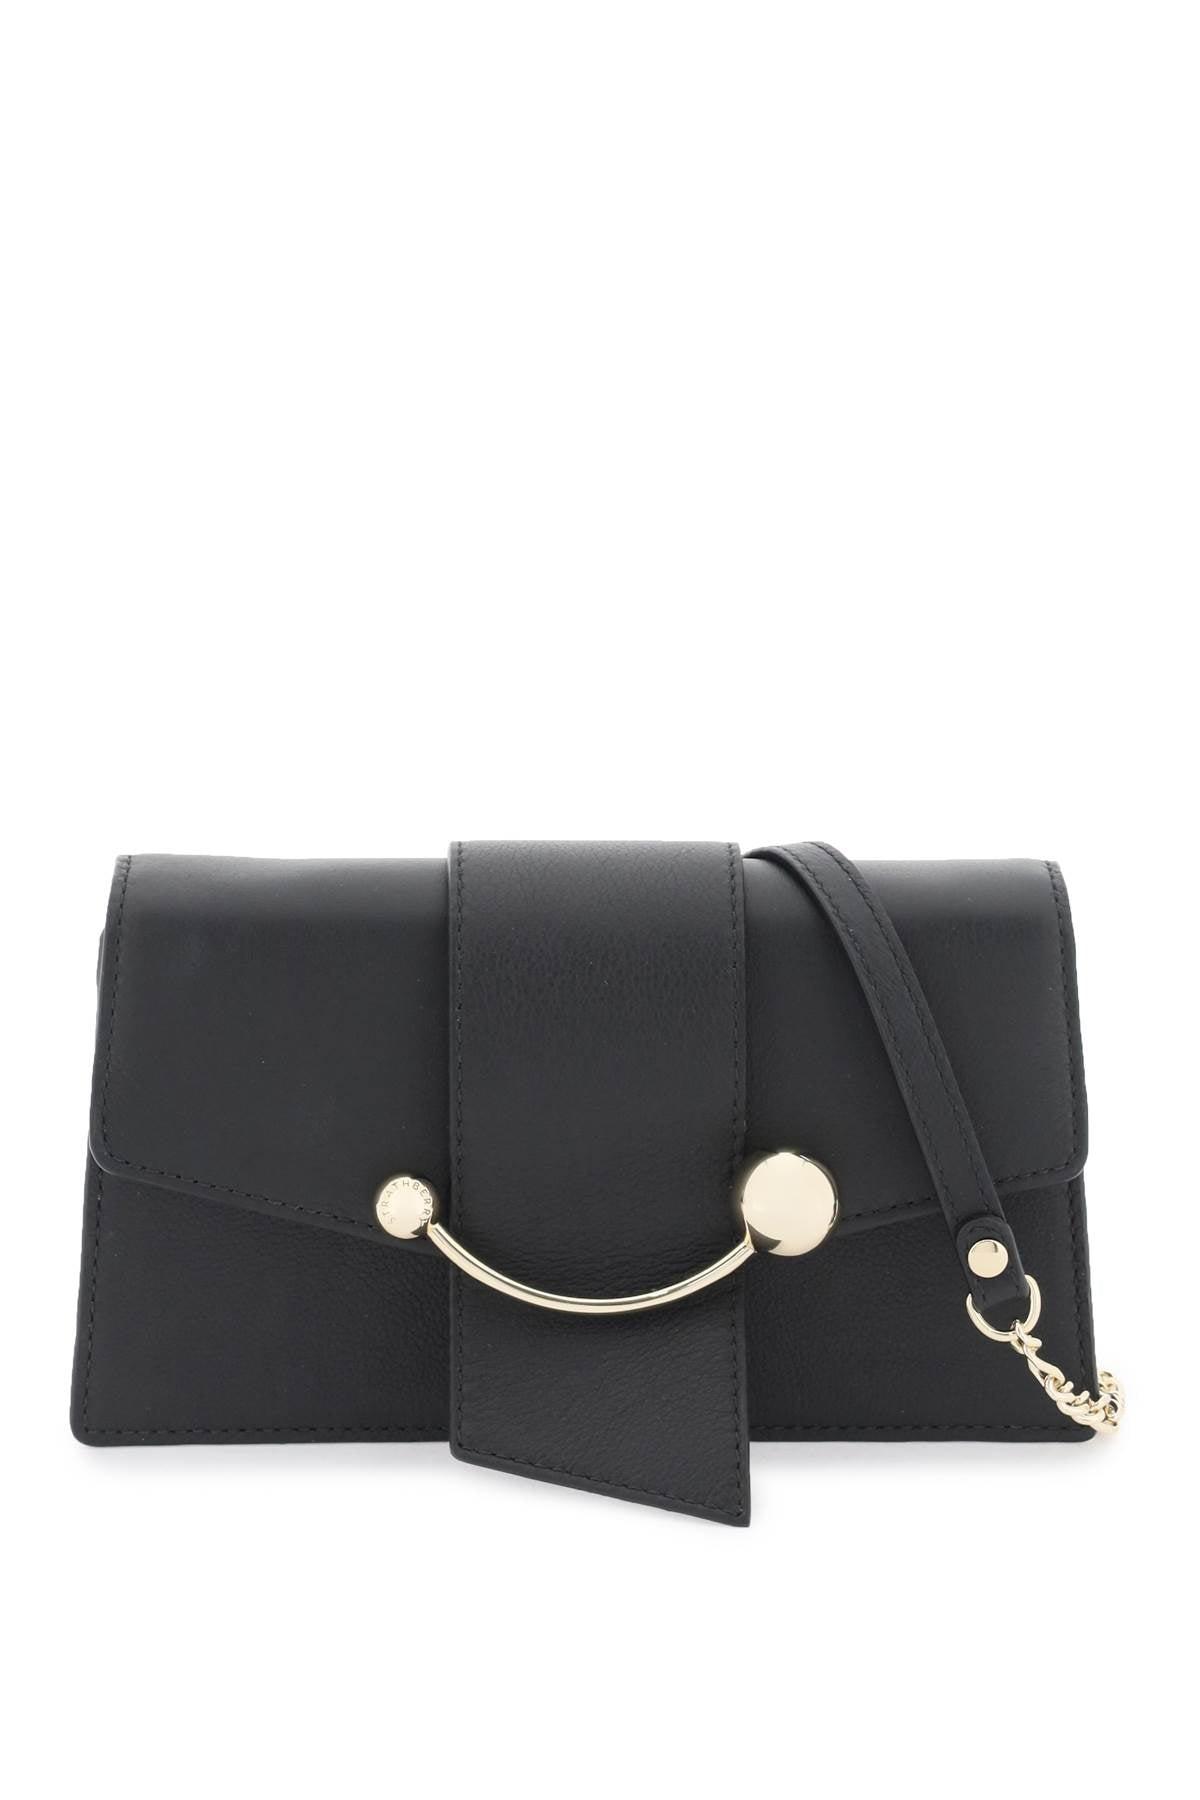 Strathberry 'crescent On A Chain' Crossbody Mini Bag in Black | Lyst